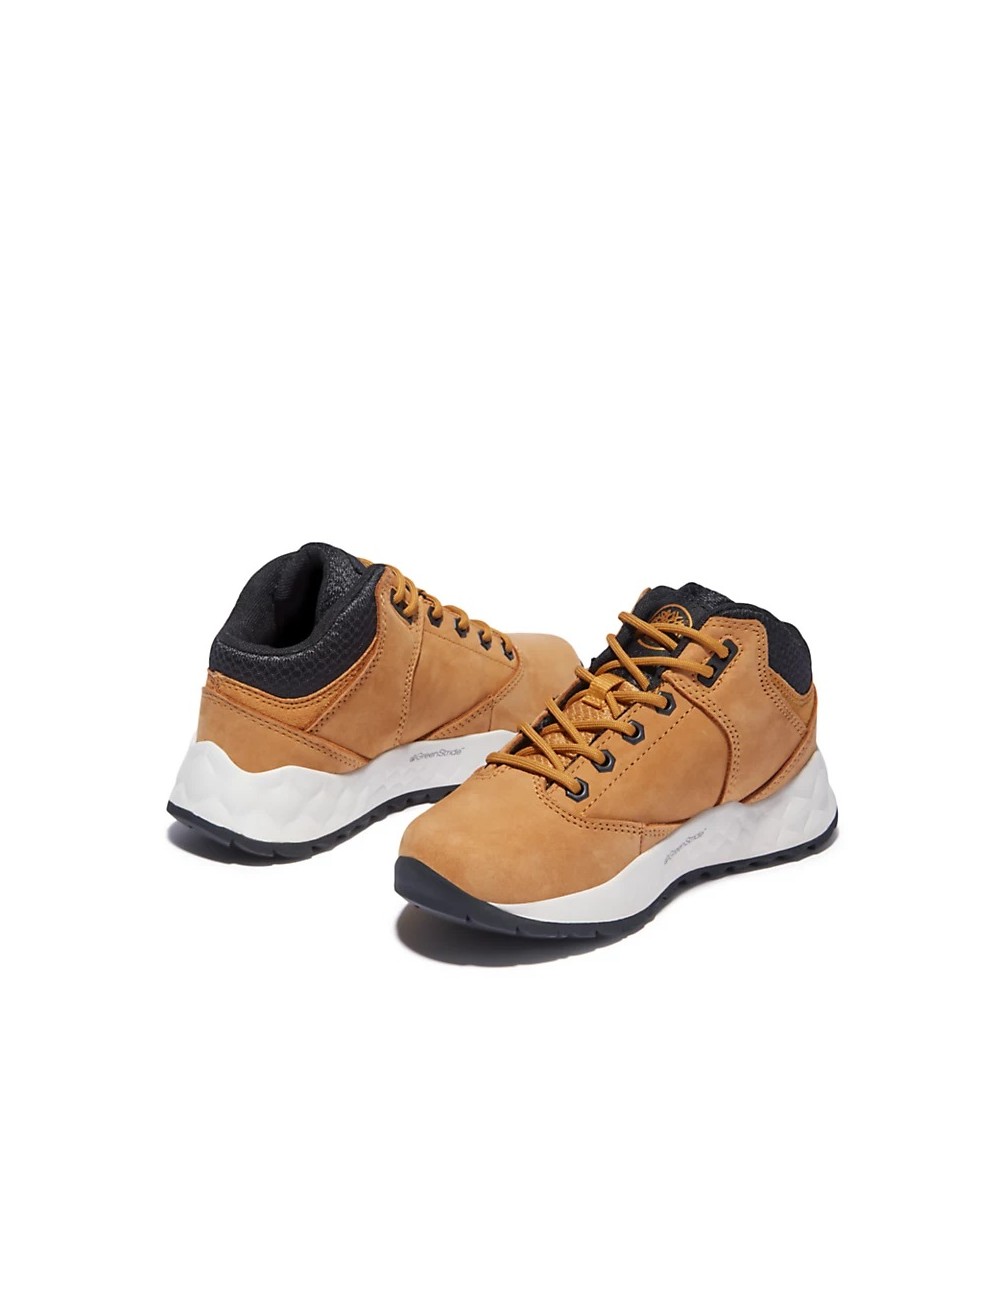 SNEAKERS MUJER SOLAR WAVE AMARILLO